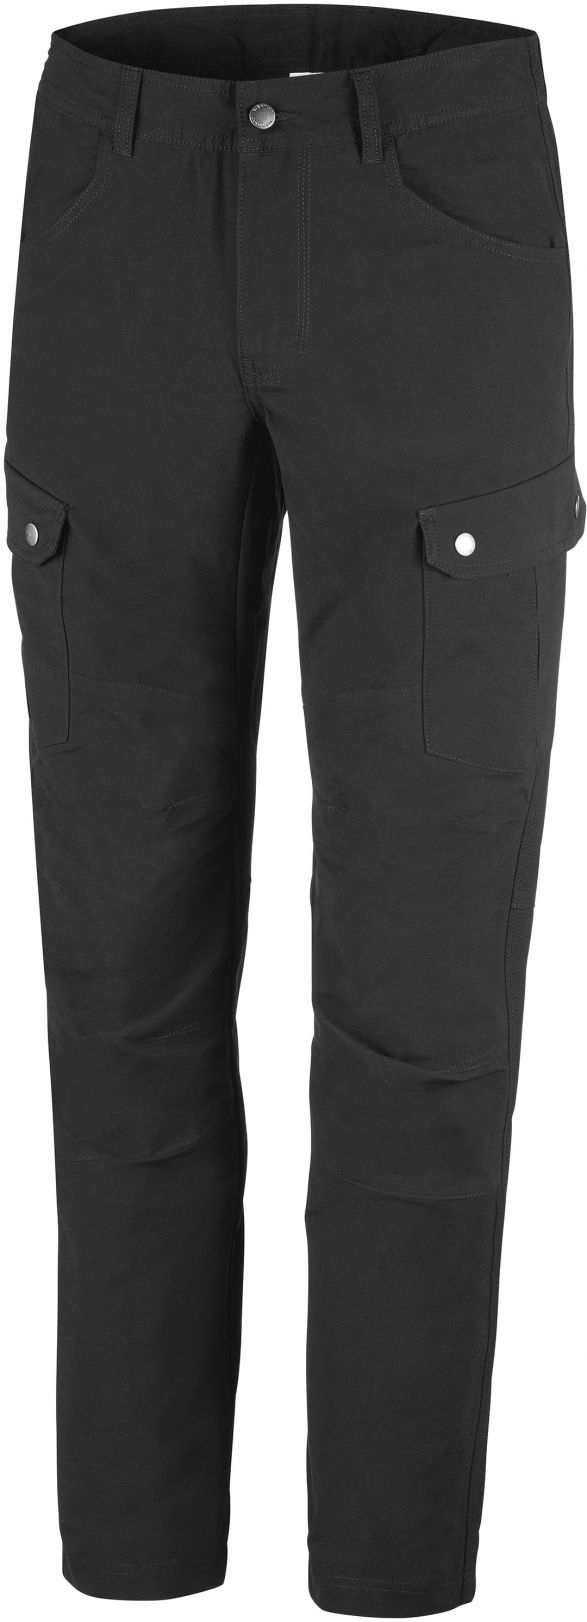 Columbia Twisted Divide Pants Black